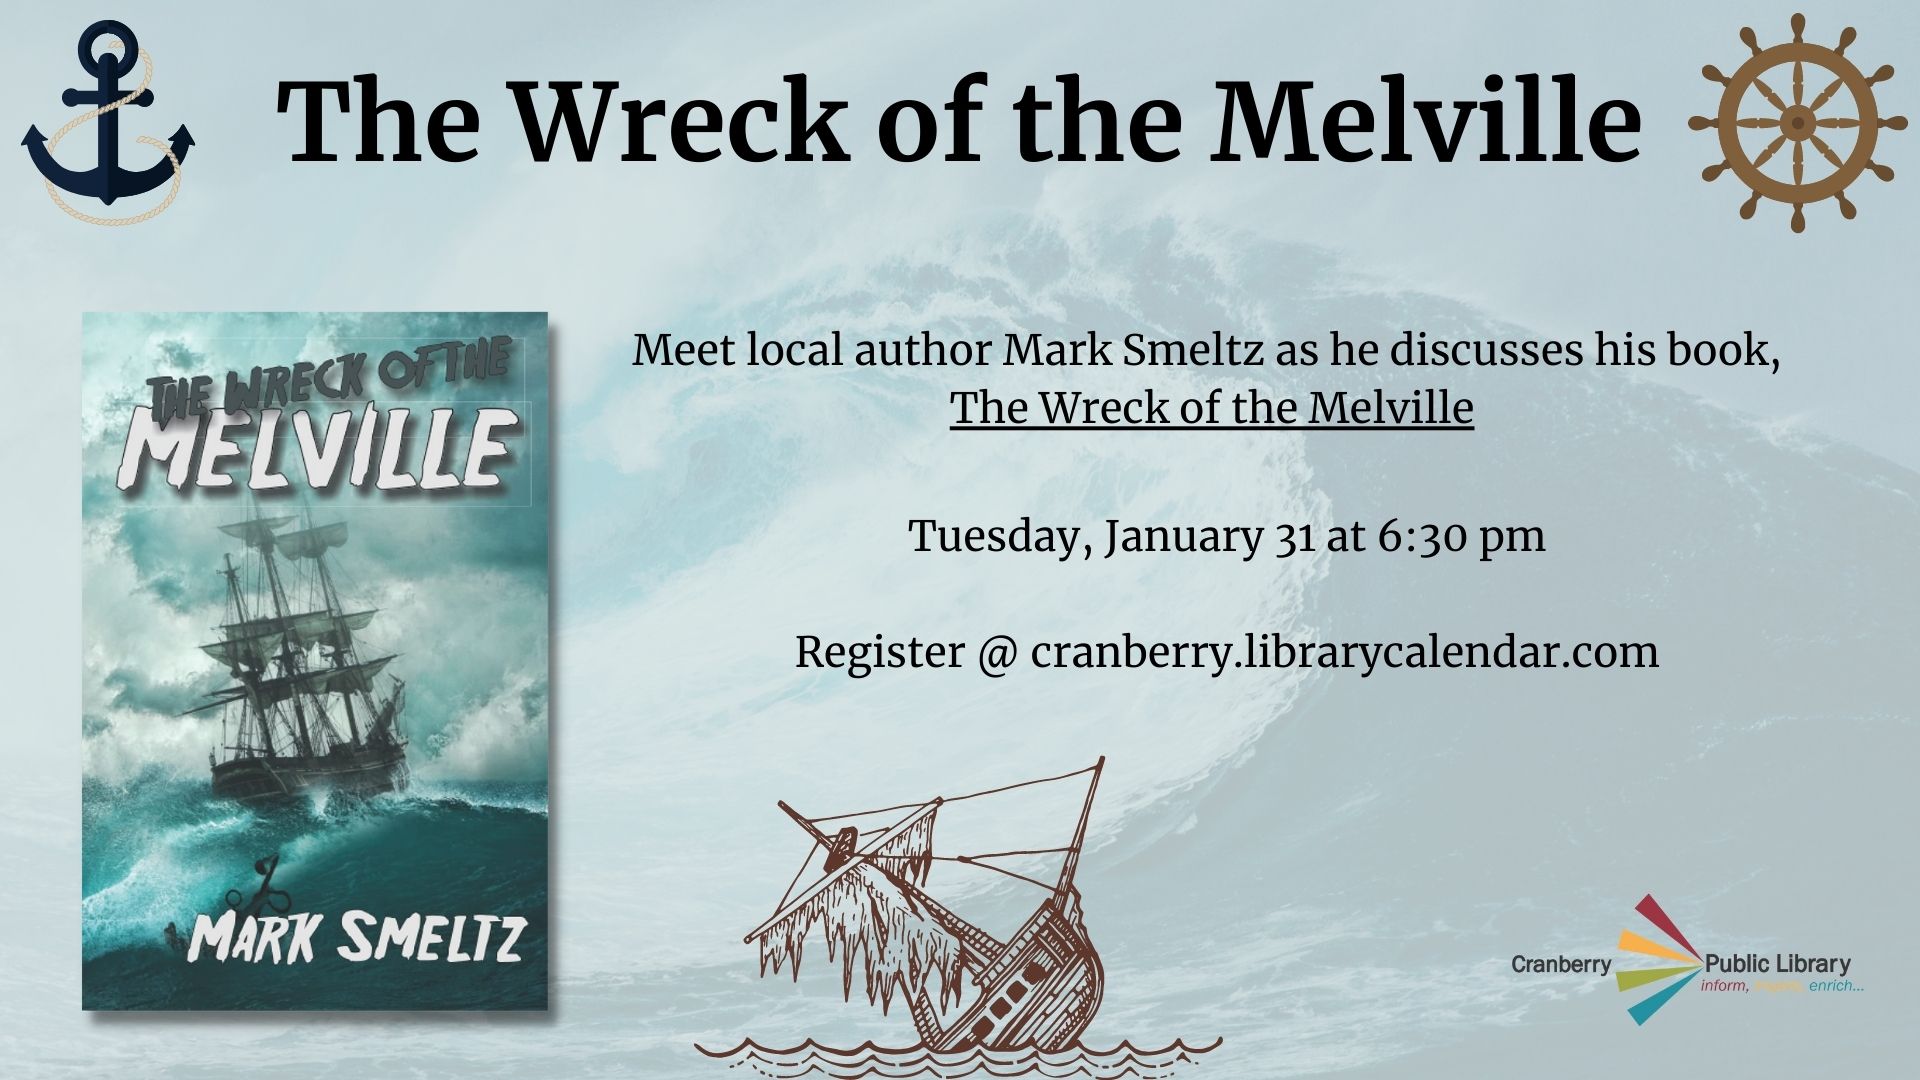 Flyer for The Wreck of the Melville author talk